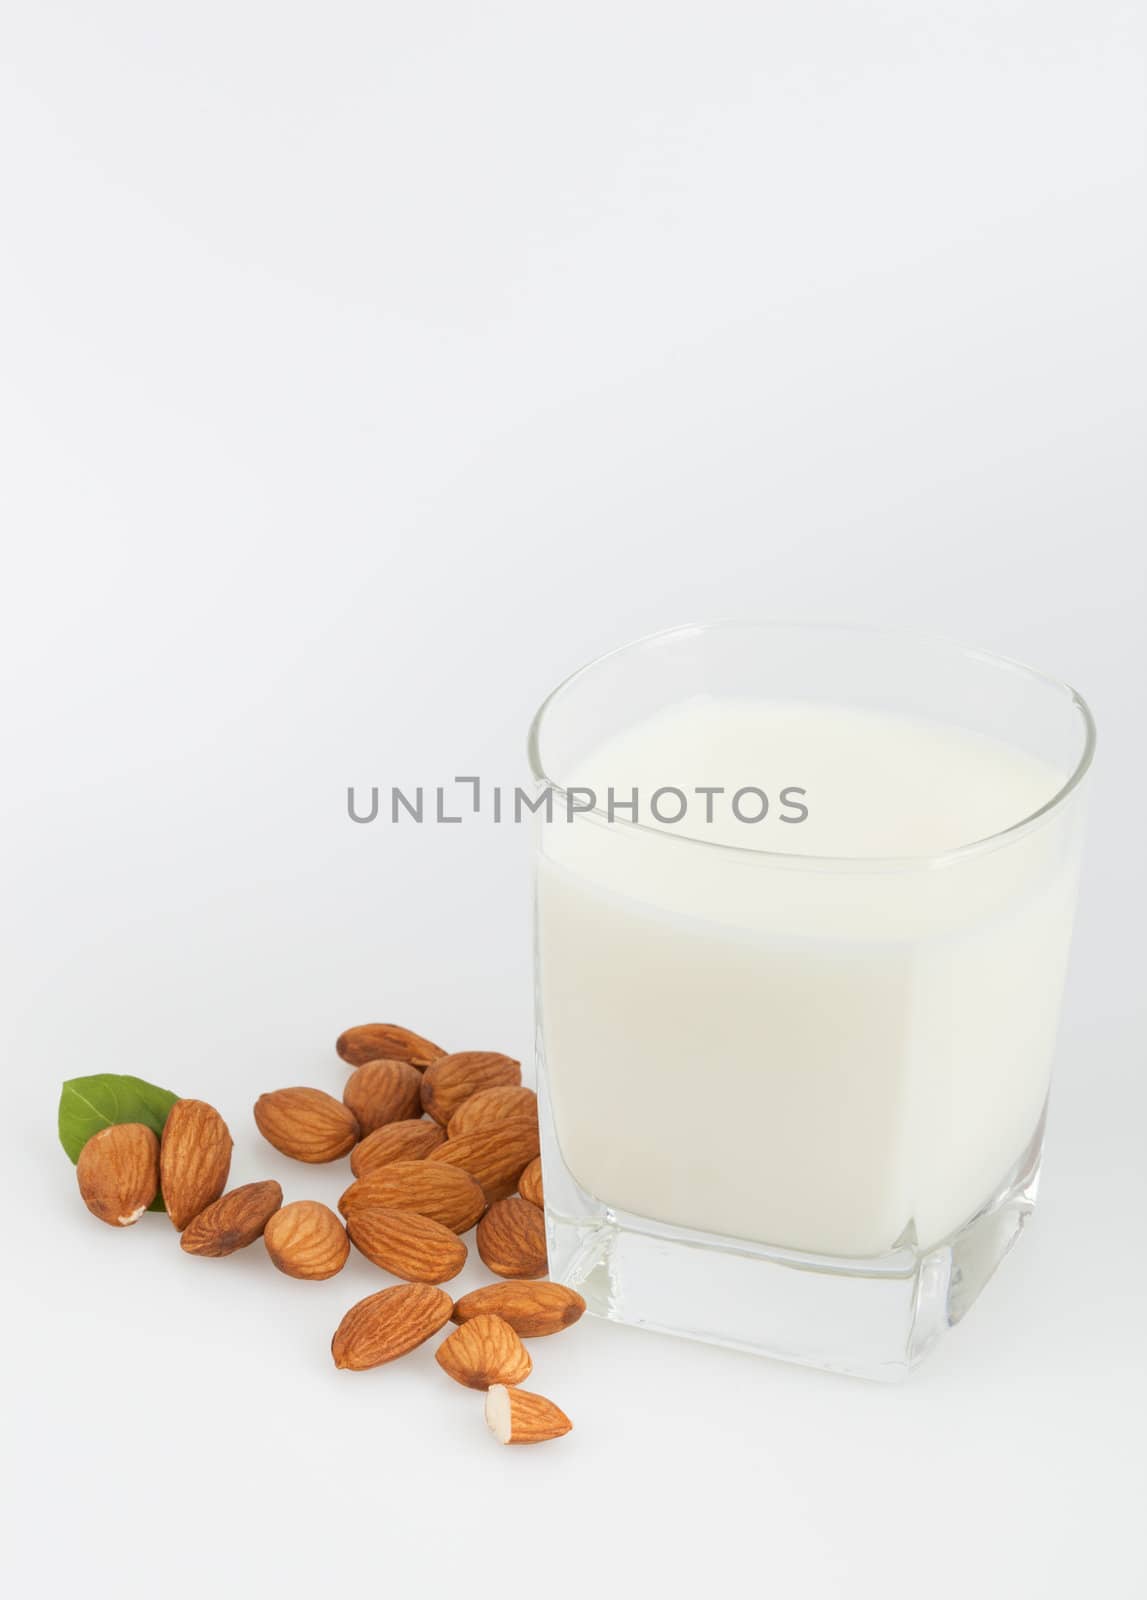 Almond milk with almonds on a white background